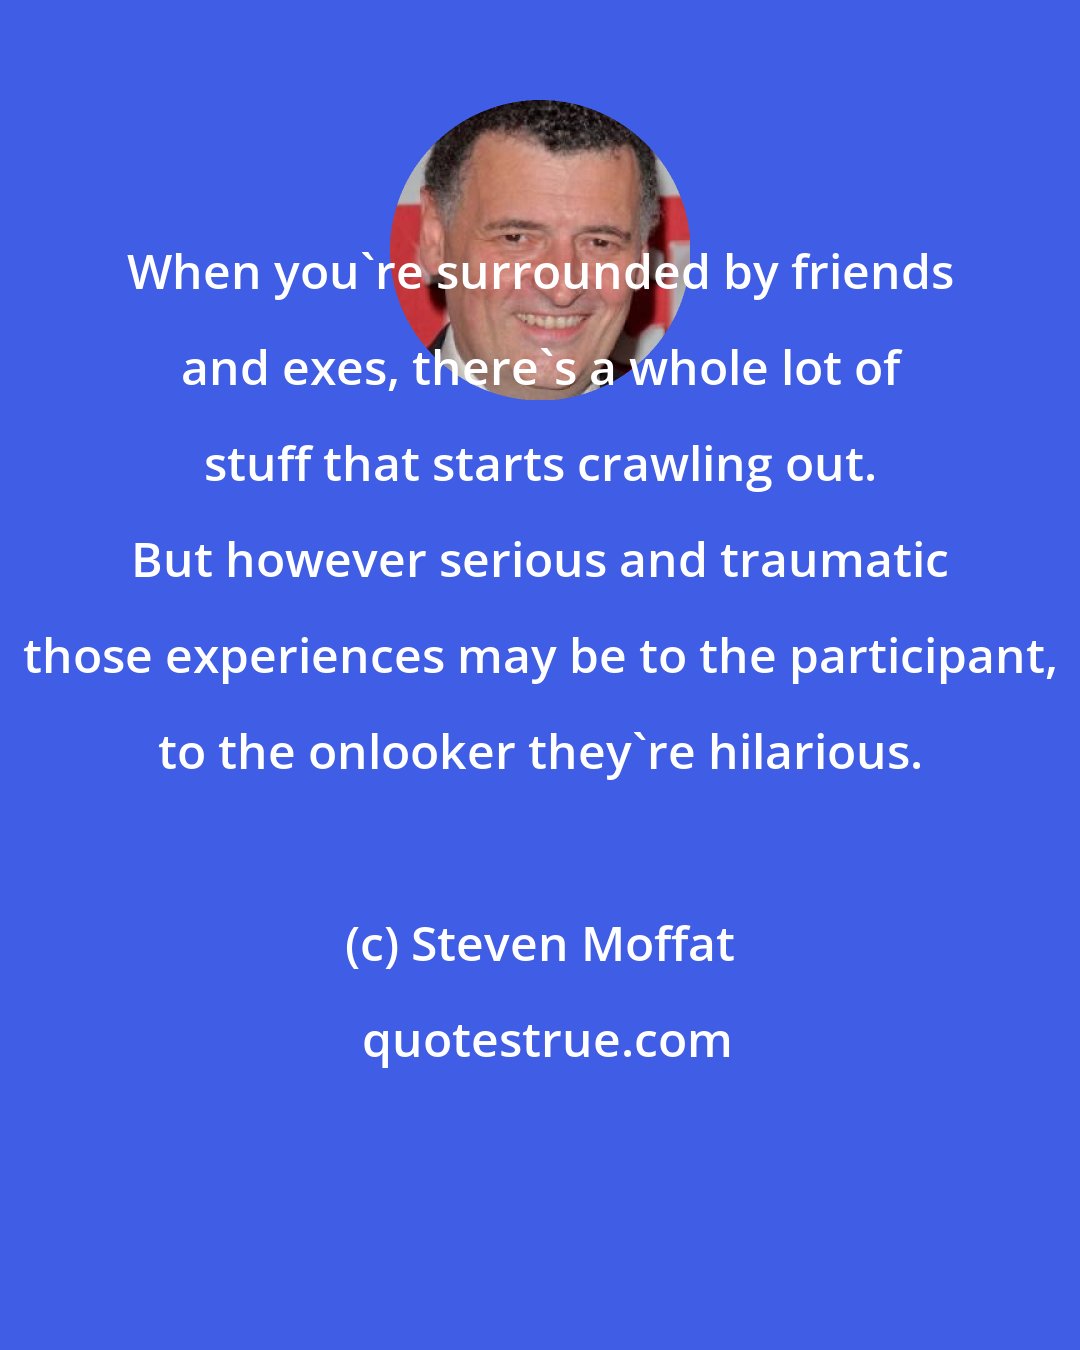 Steven Moffat: When you're surrounded by friends and exes, there's a whole lot of stuff that starts crawling out. But however serious and traumatic those experiences may be to the participant, to the onlooker they're hilarious.